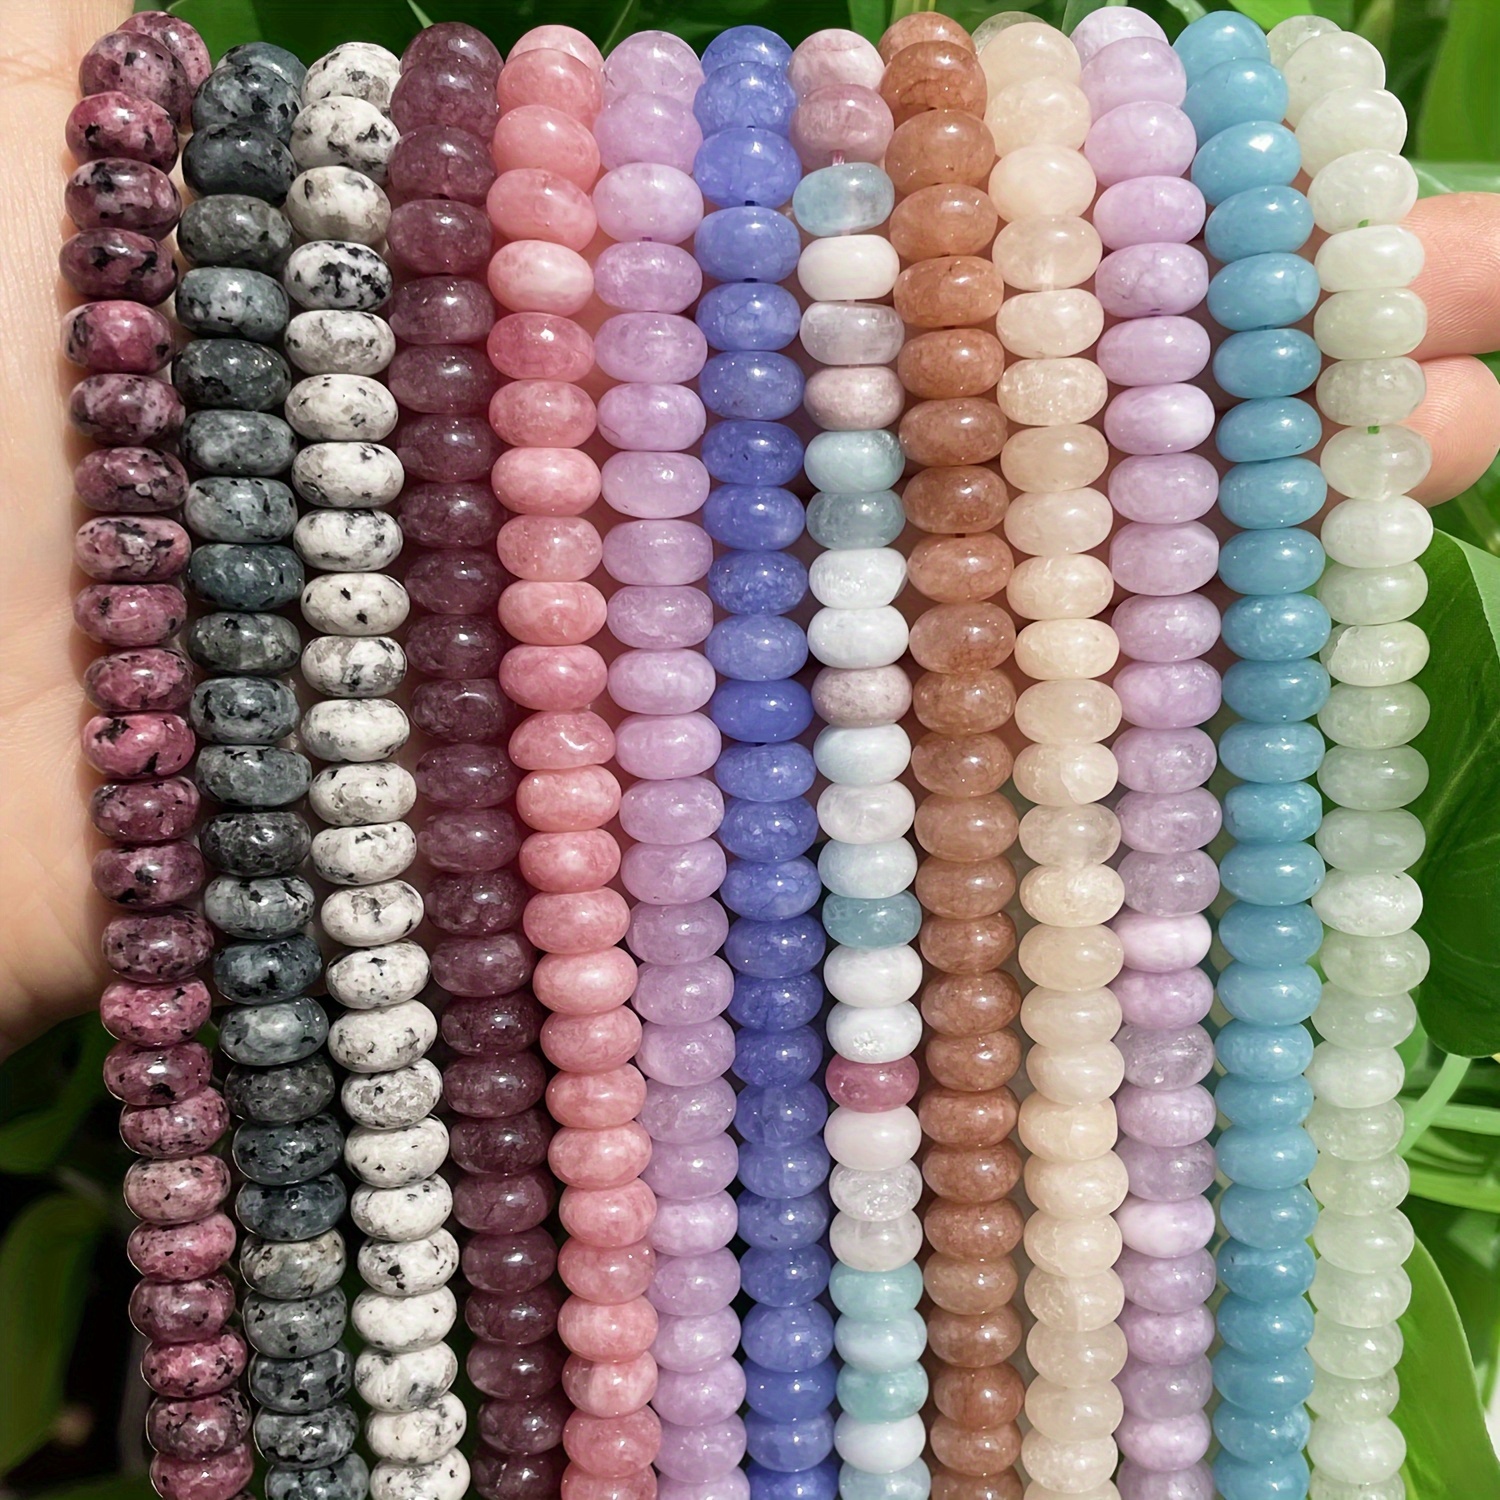 Wholesale 20Pcs Silicone Beads Rainbow Silicone Beads Bulk Hot Air Balloon  Silicone Loose Spacer Beads Charm Color Silicone Bead Kit for Necklace  Bracelet Keychain DIY Crafts Making 